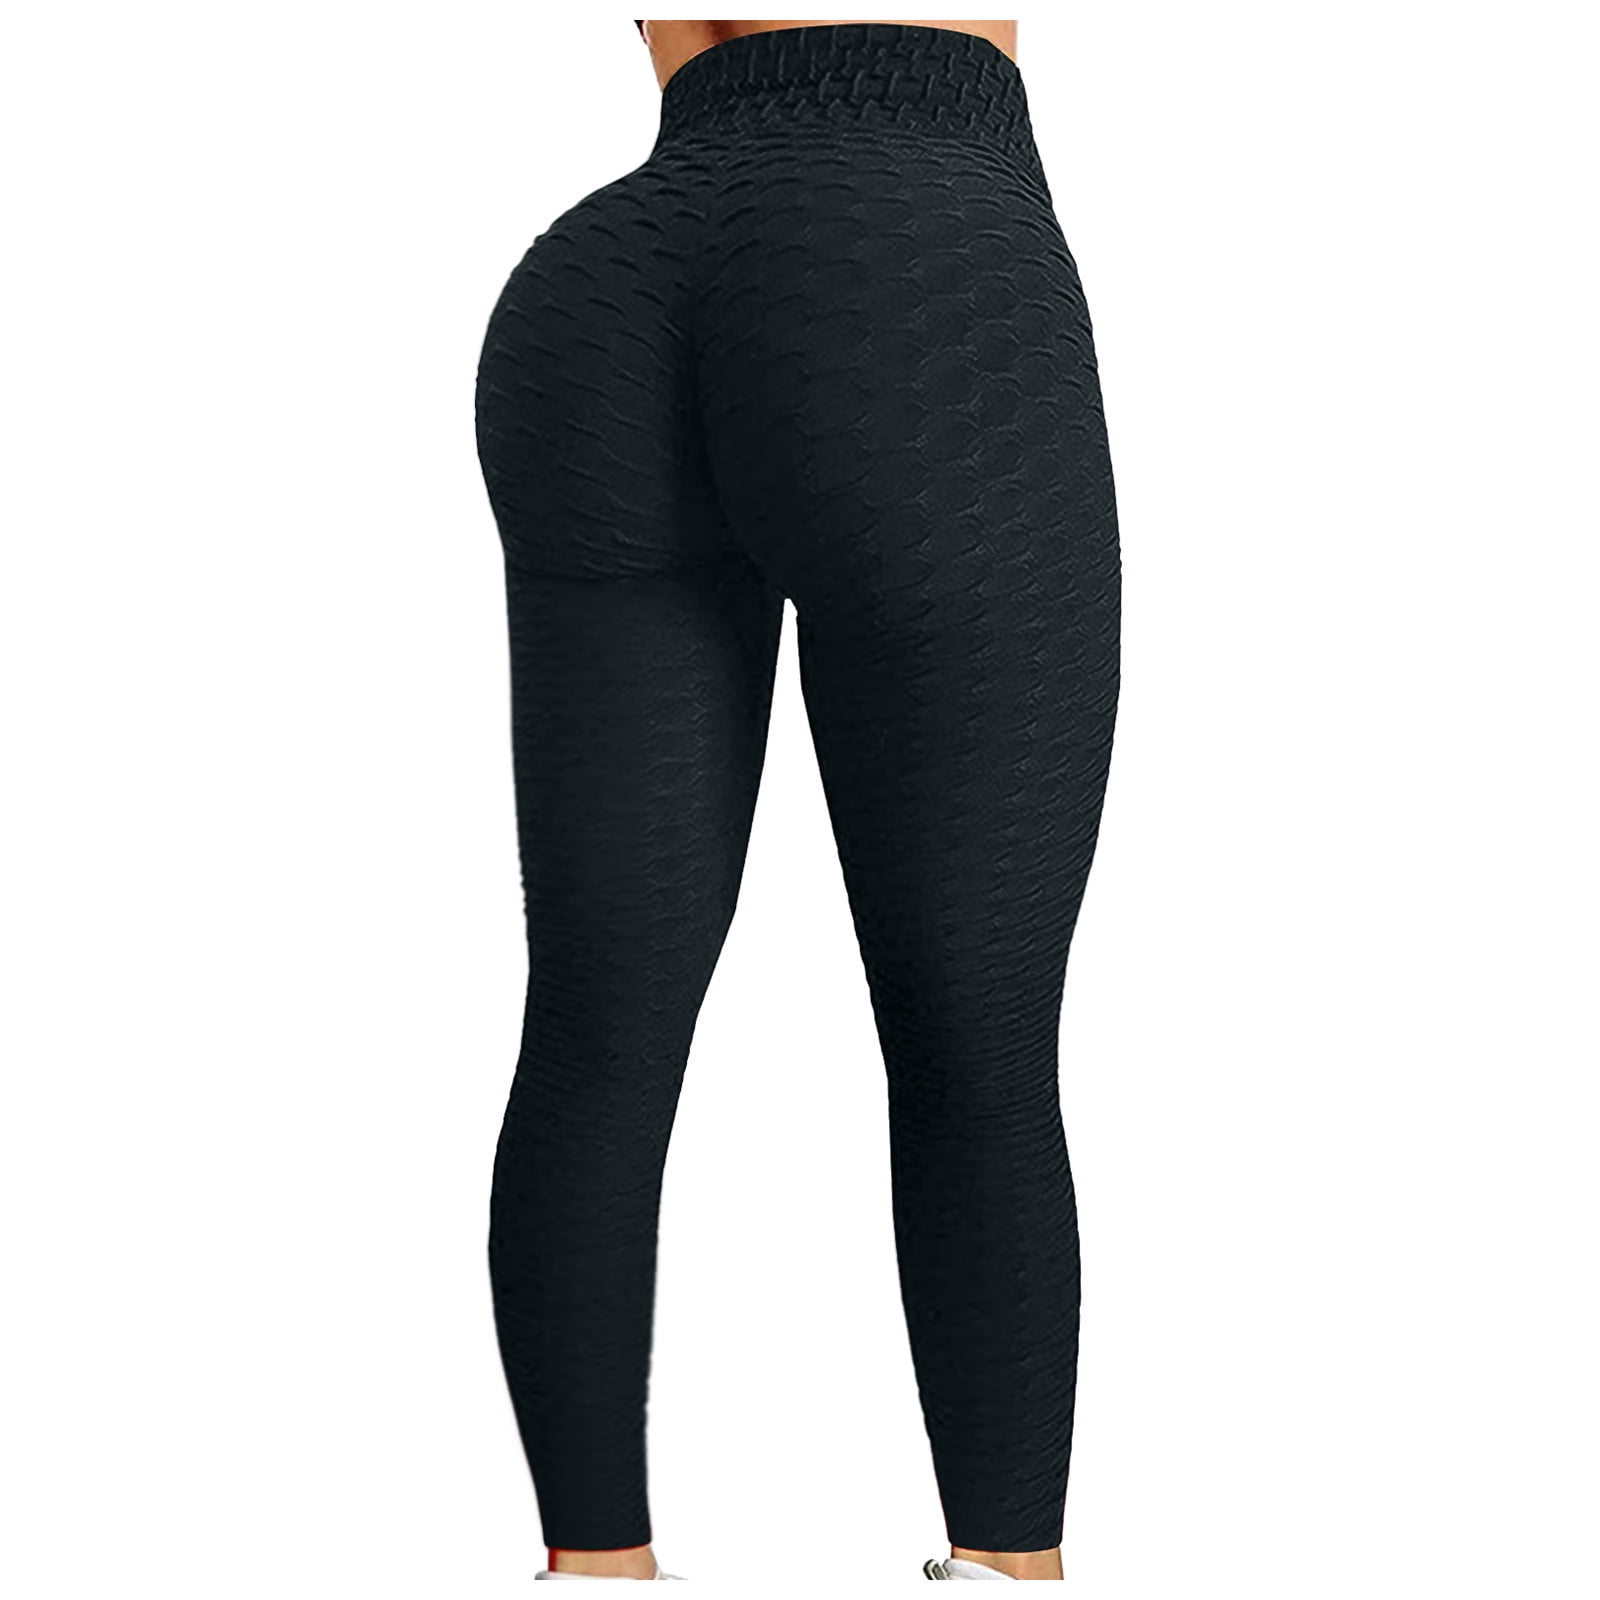 Buy HerBose High Waisted Leggings for Women Tummy Control  Compression  Workout Yoga Pants (Black, XXX-Large) at